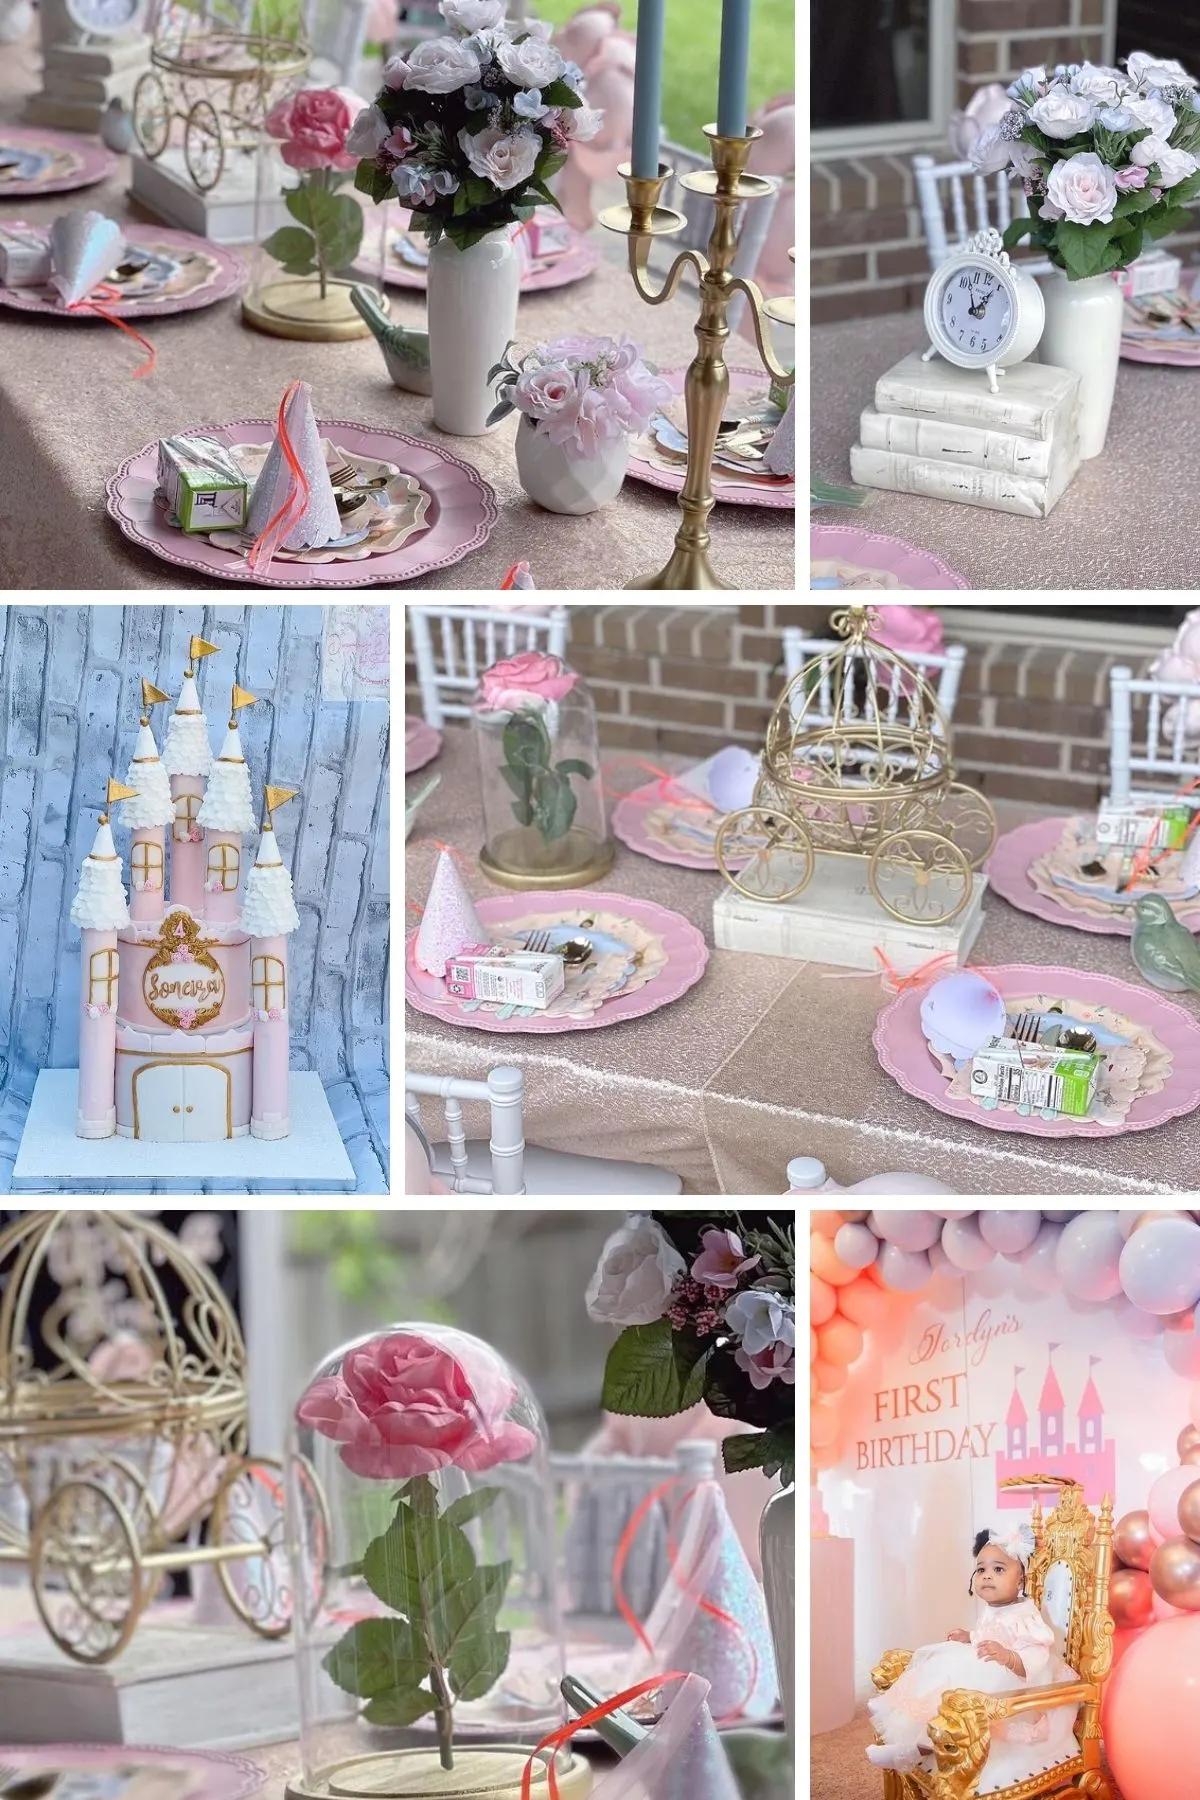 Photo collage for once upon a time party theme including cakes, table settings, and decorations.